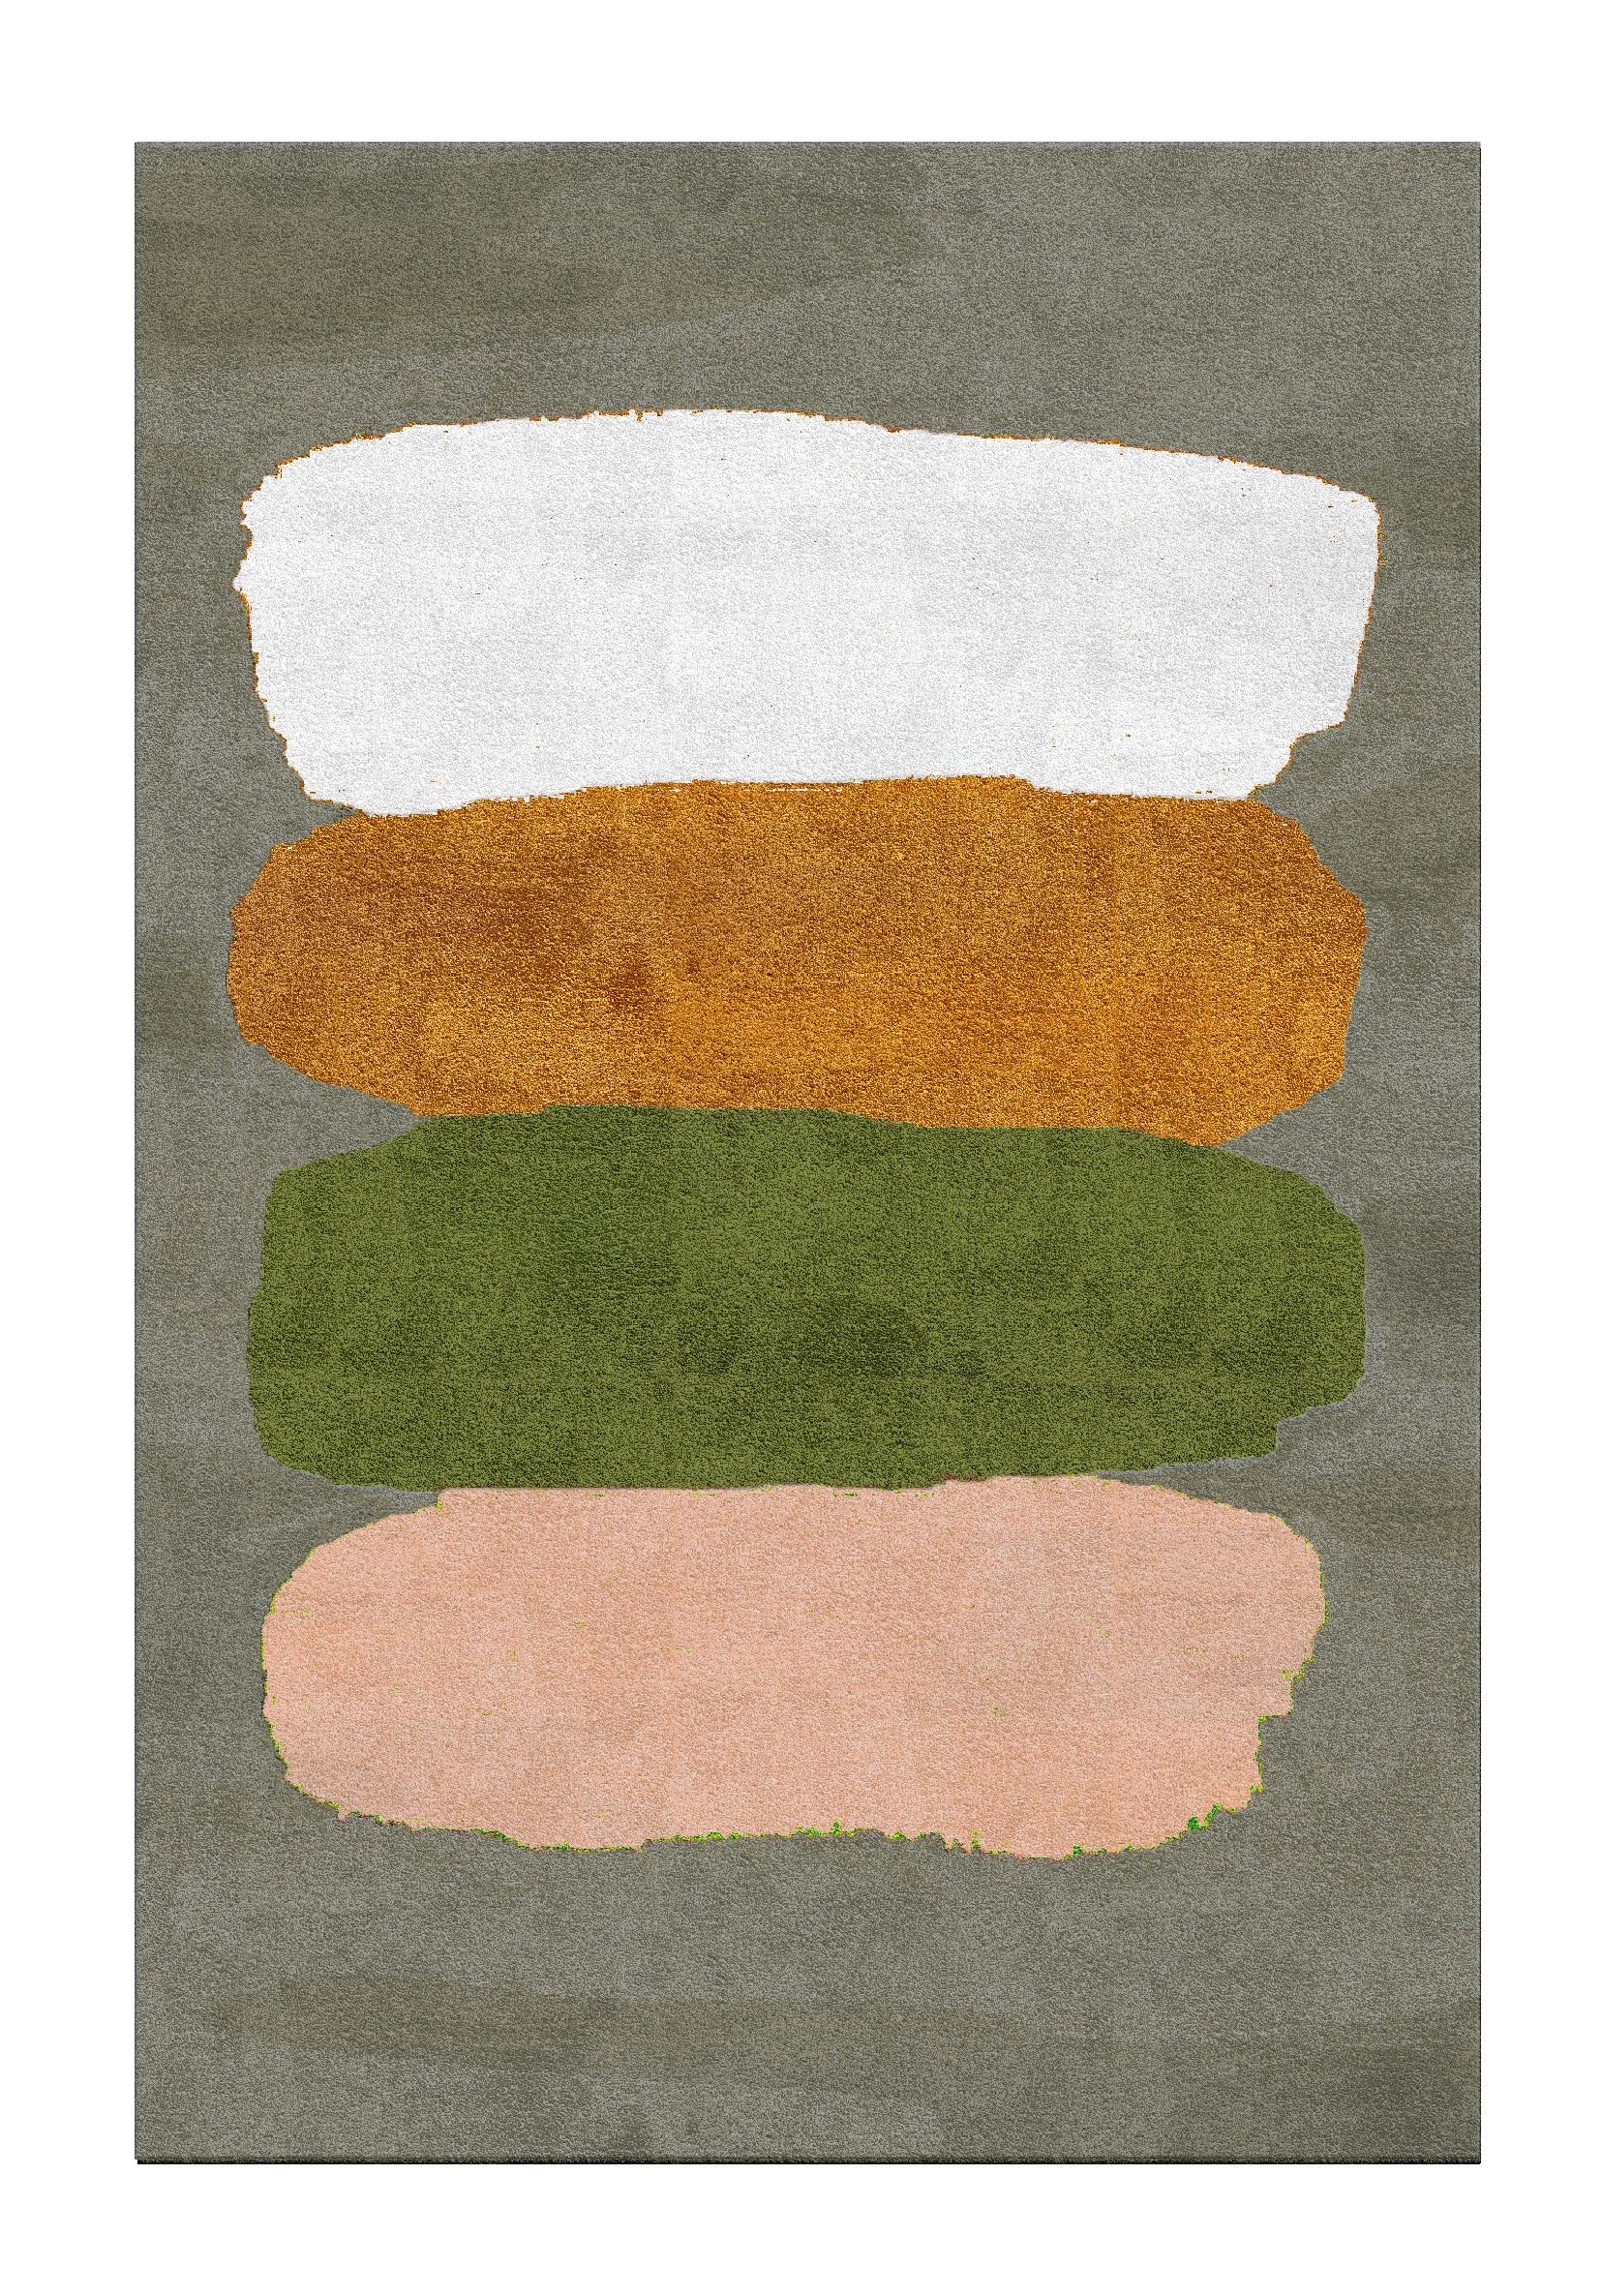 Palette rug II by Sarah Balivo
Dimensions: D 300 x W 200 cm
Materials: Viscose, linen
Available in other colors.

The Palette collection drives its inspiration from the interior design world.
Each rug becomes a canvas redefining the interior